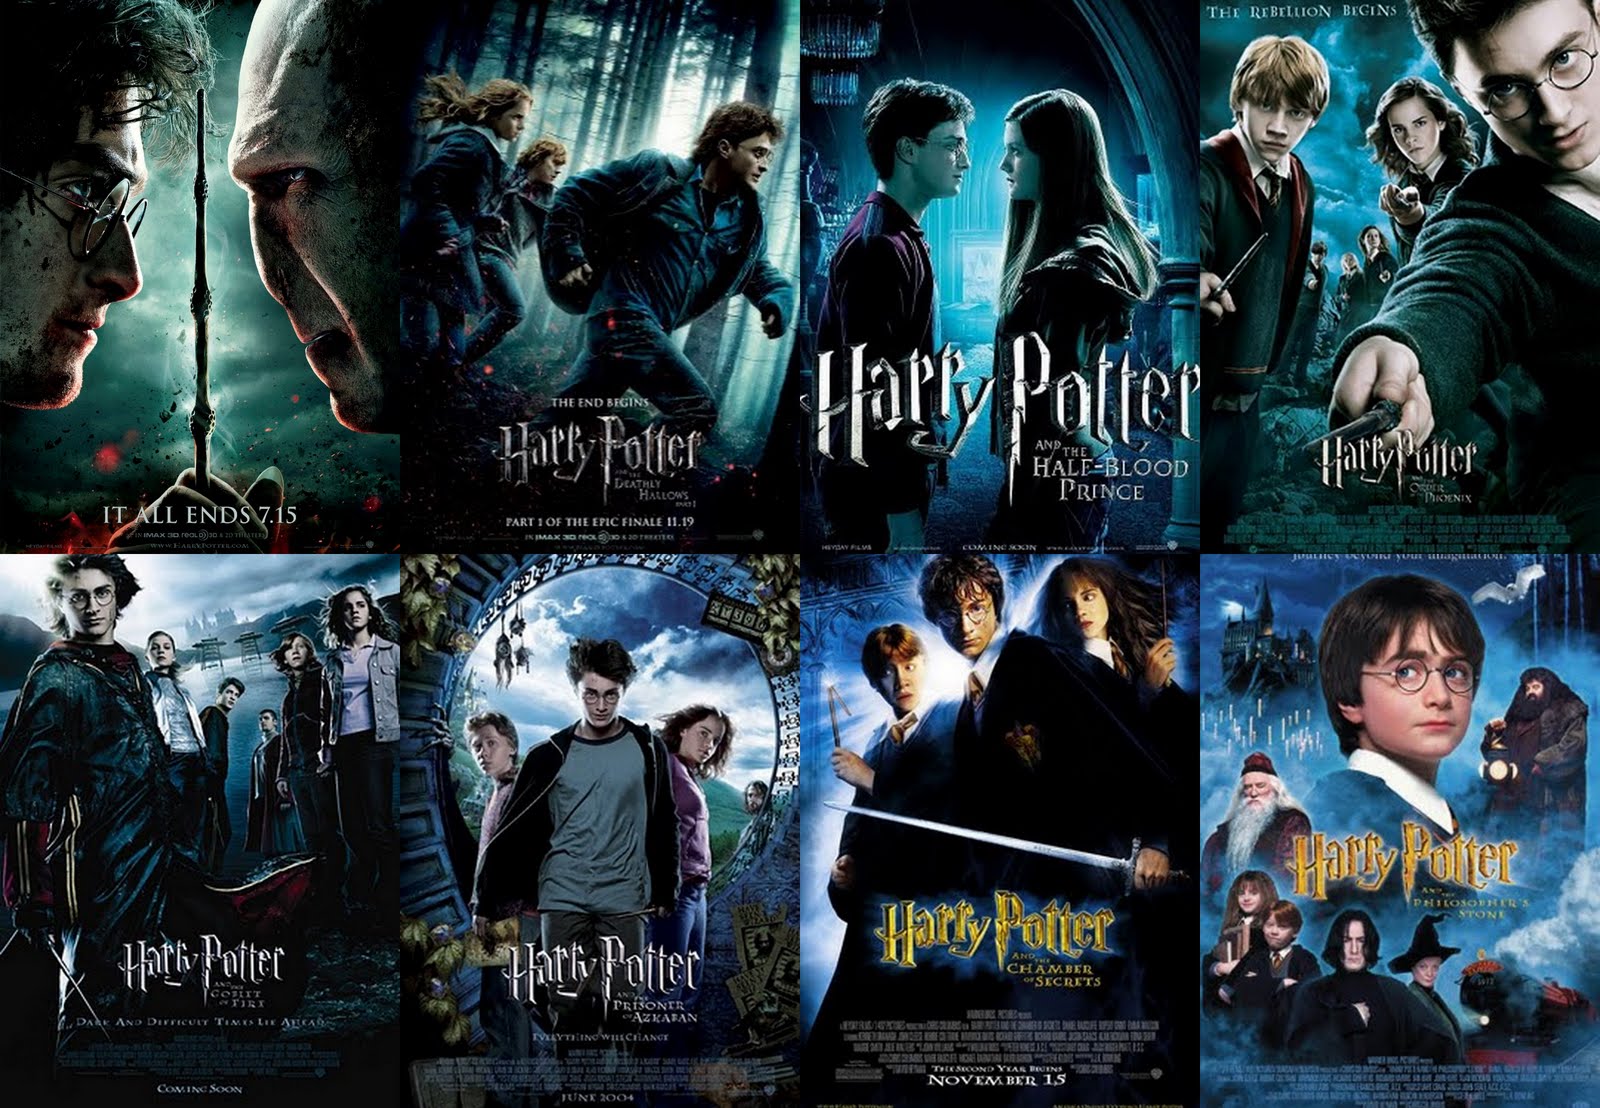 Harry potter is a series